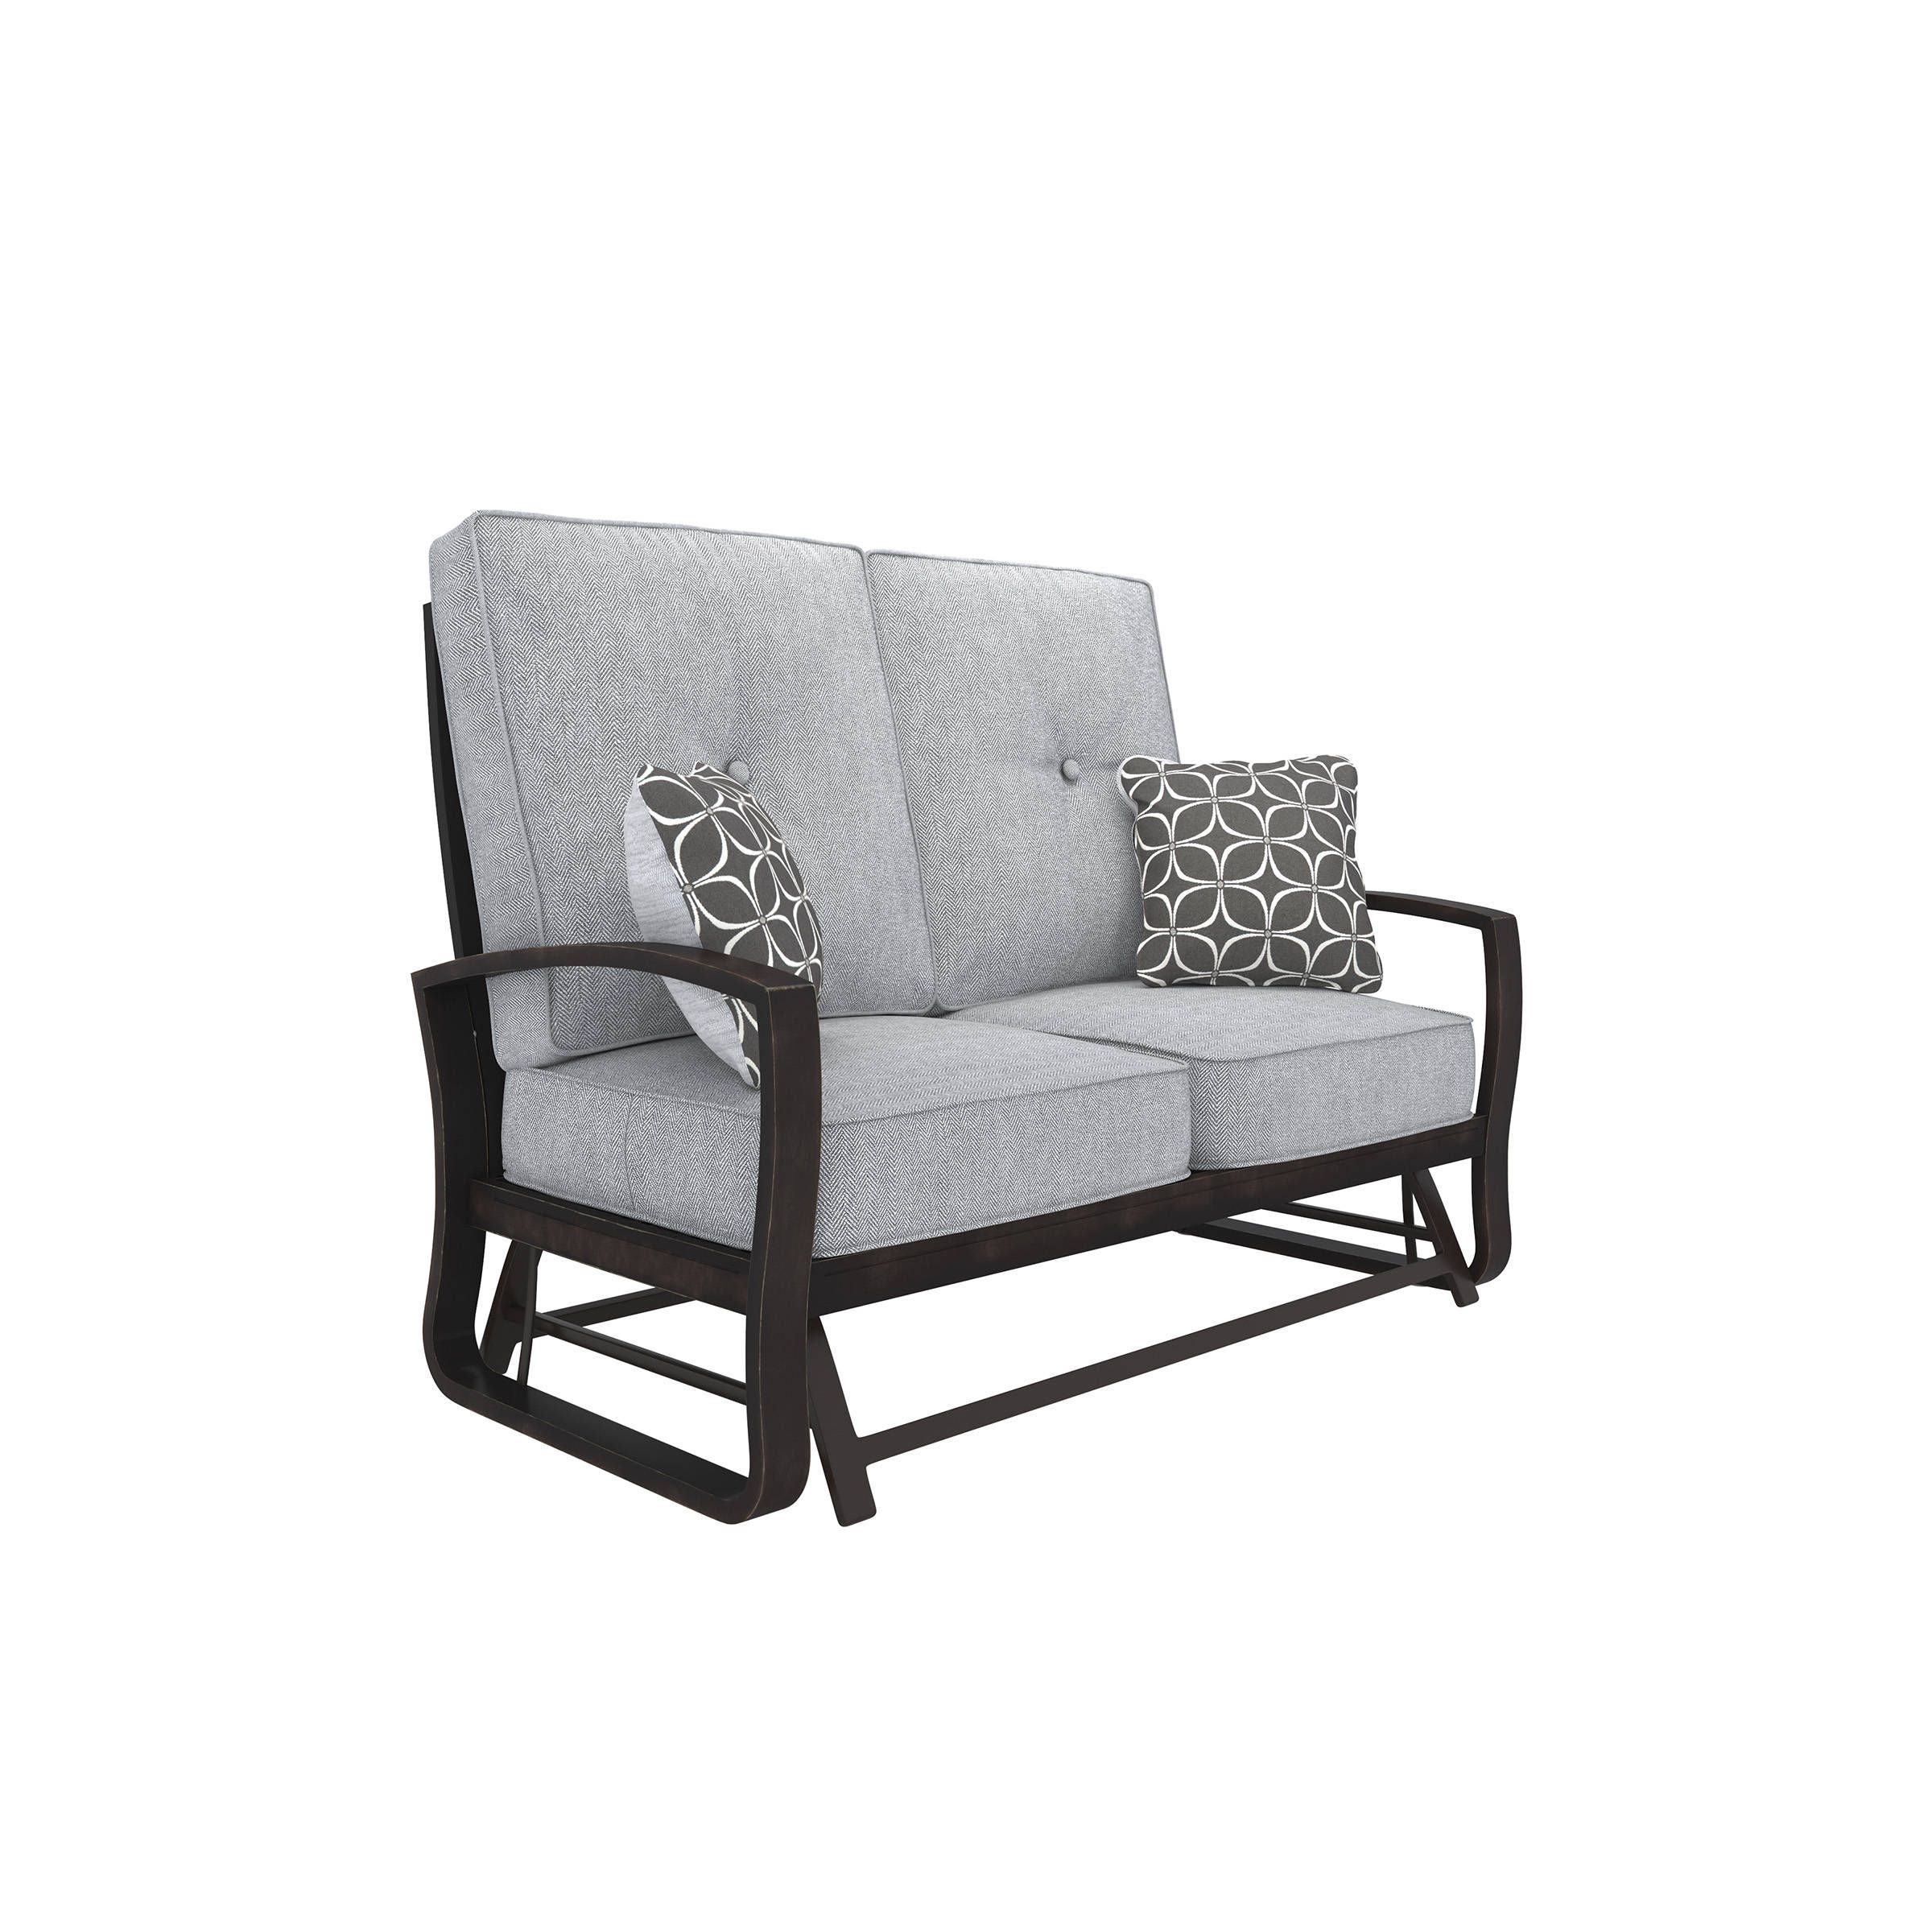 Ashley Furniture Castle Island Cushion Glider Loveseat | The Regarding Cushioned Glider Benches With Cushions (View 9 of 27)